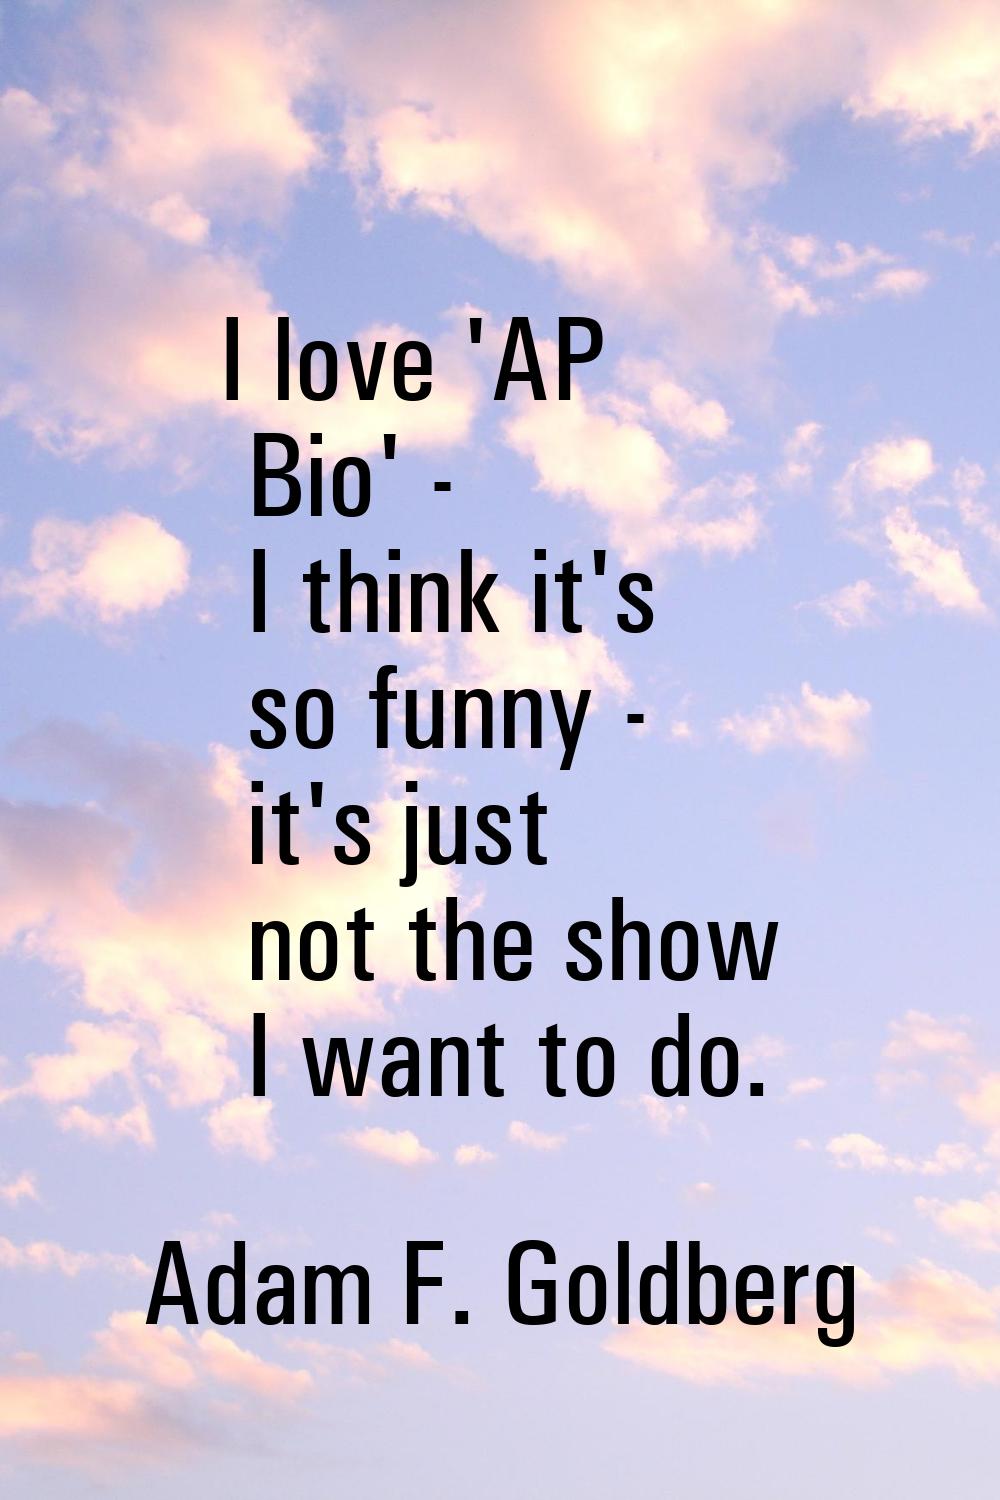 I love 'AP Bio' - I think it's so funny - it's just not the show I want to do.